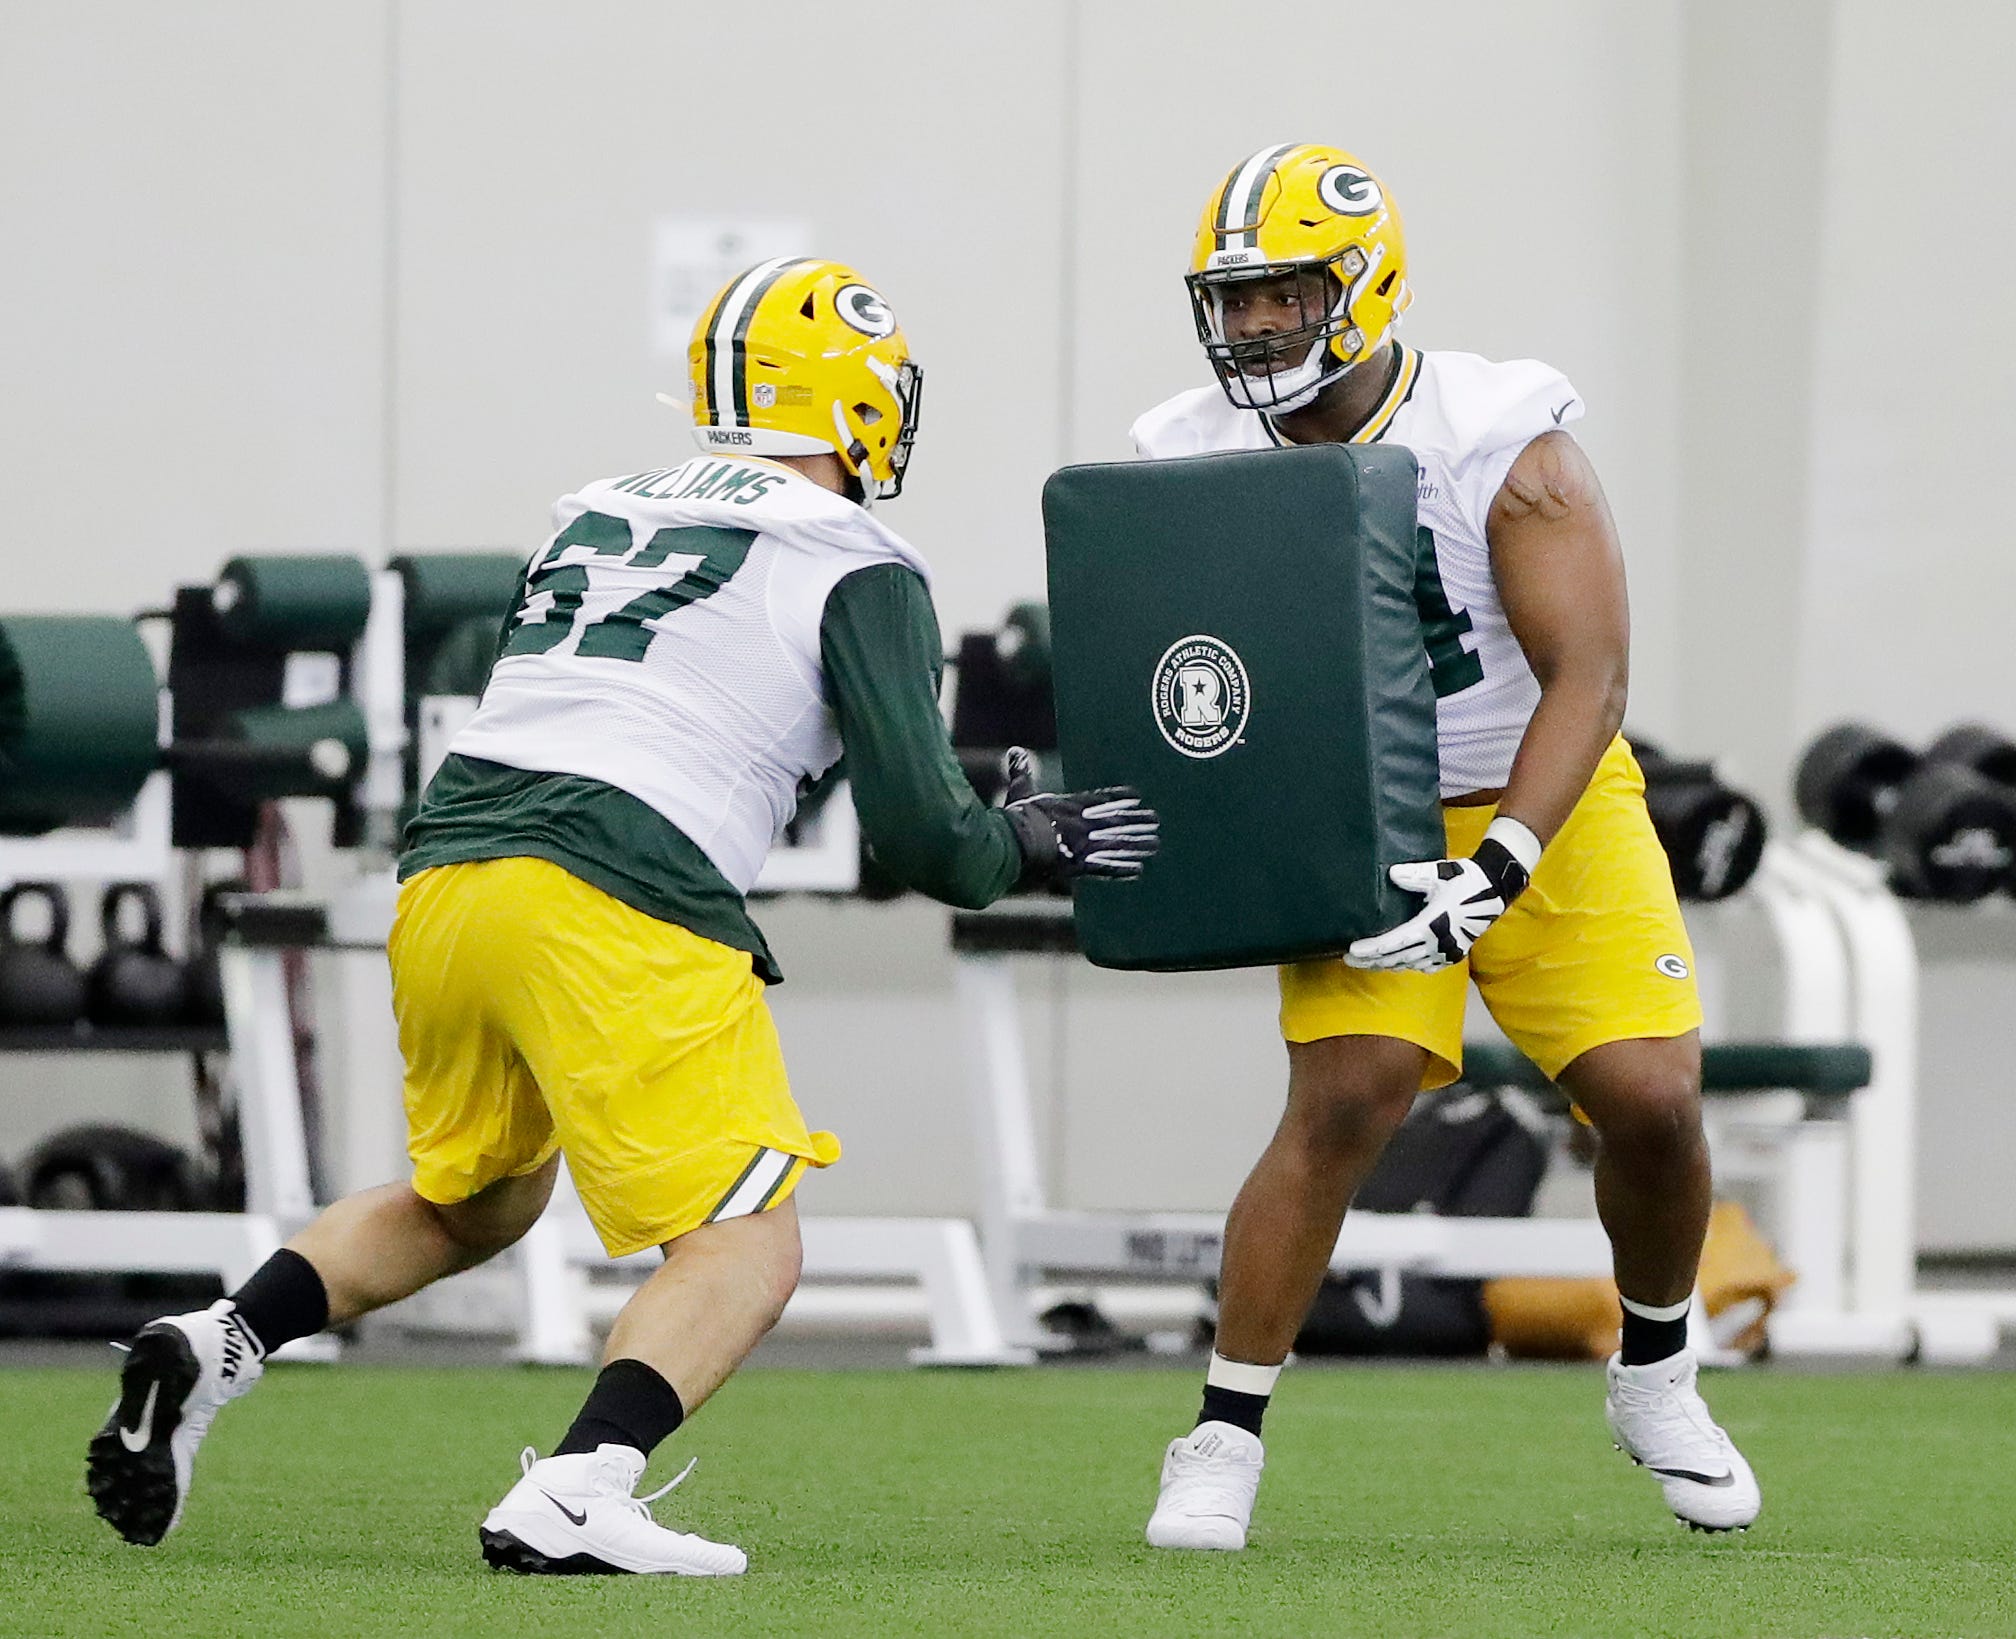 Green Bay Packers offensive lineman Elgton Jenkins (74) during practice at rookie minicamp at the Don Hutson Center on Friday, May 3, 2019 in Ashwaubenon, Wis.
Adam Wesley/USA TODAY NETWORK-Wis